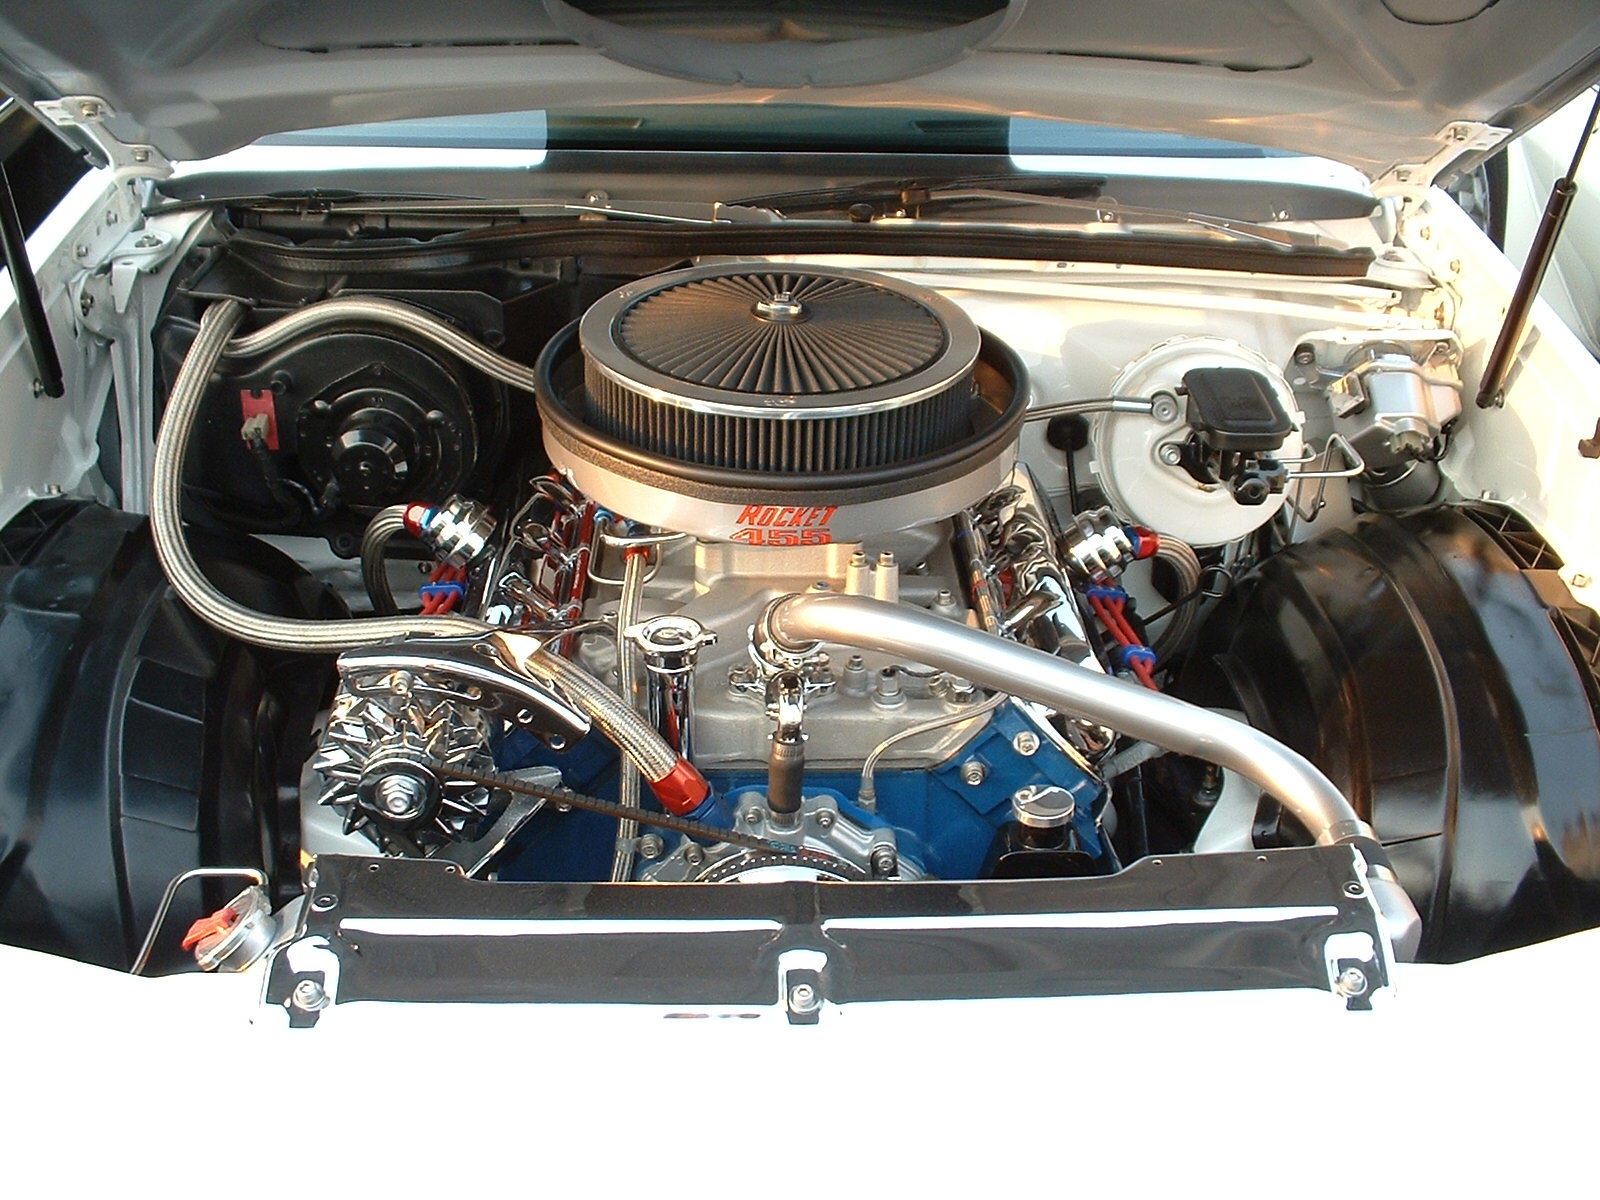 Engine bay at Willy's.JPG